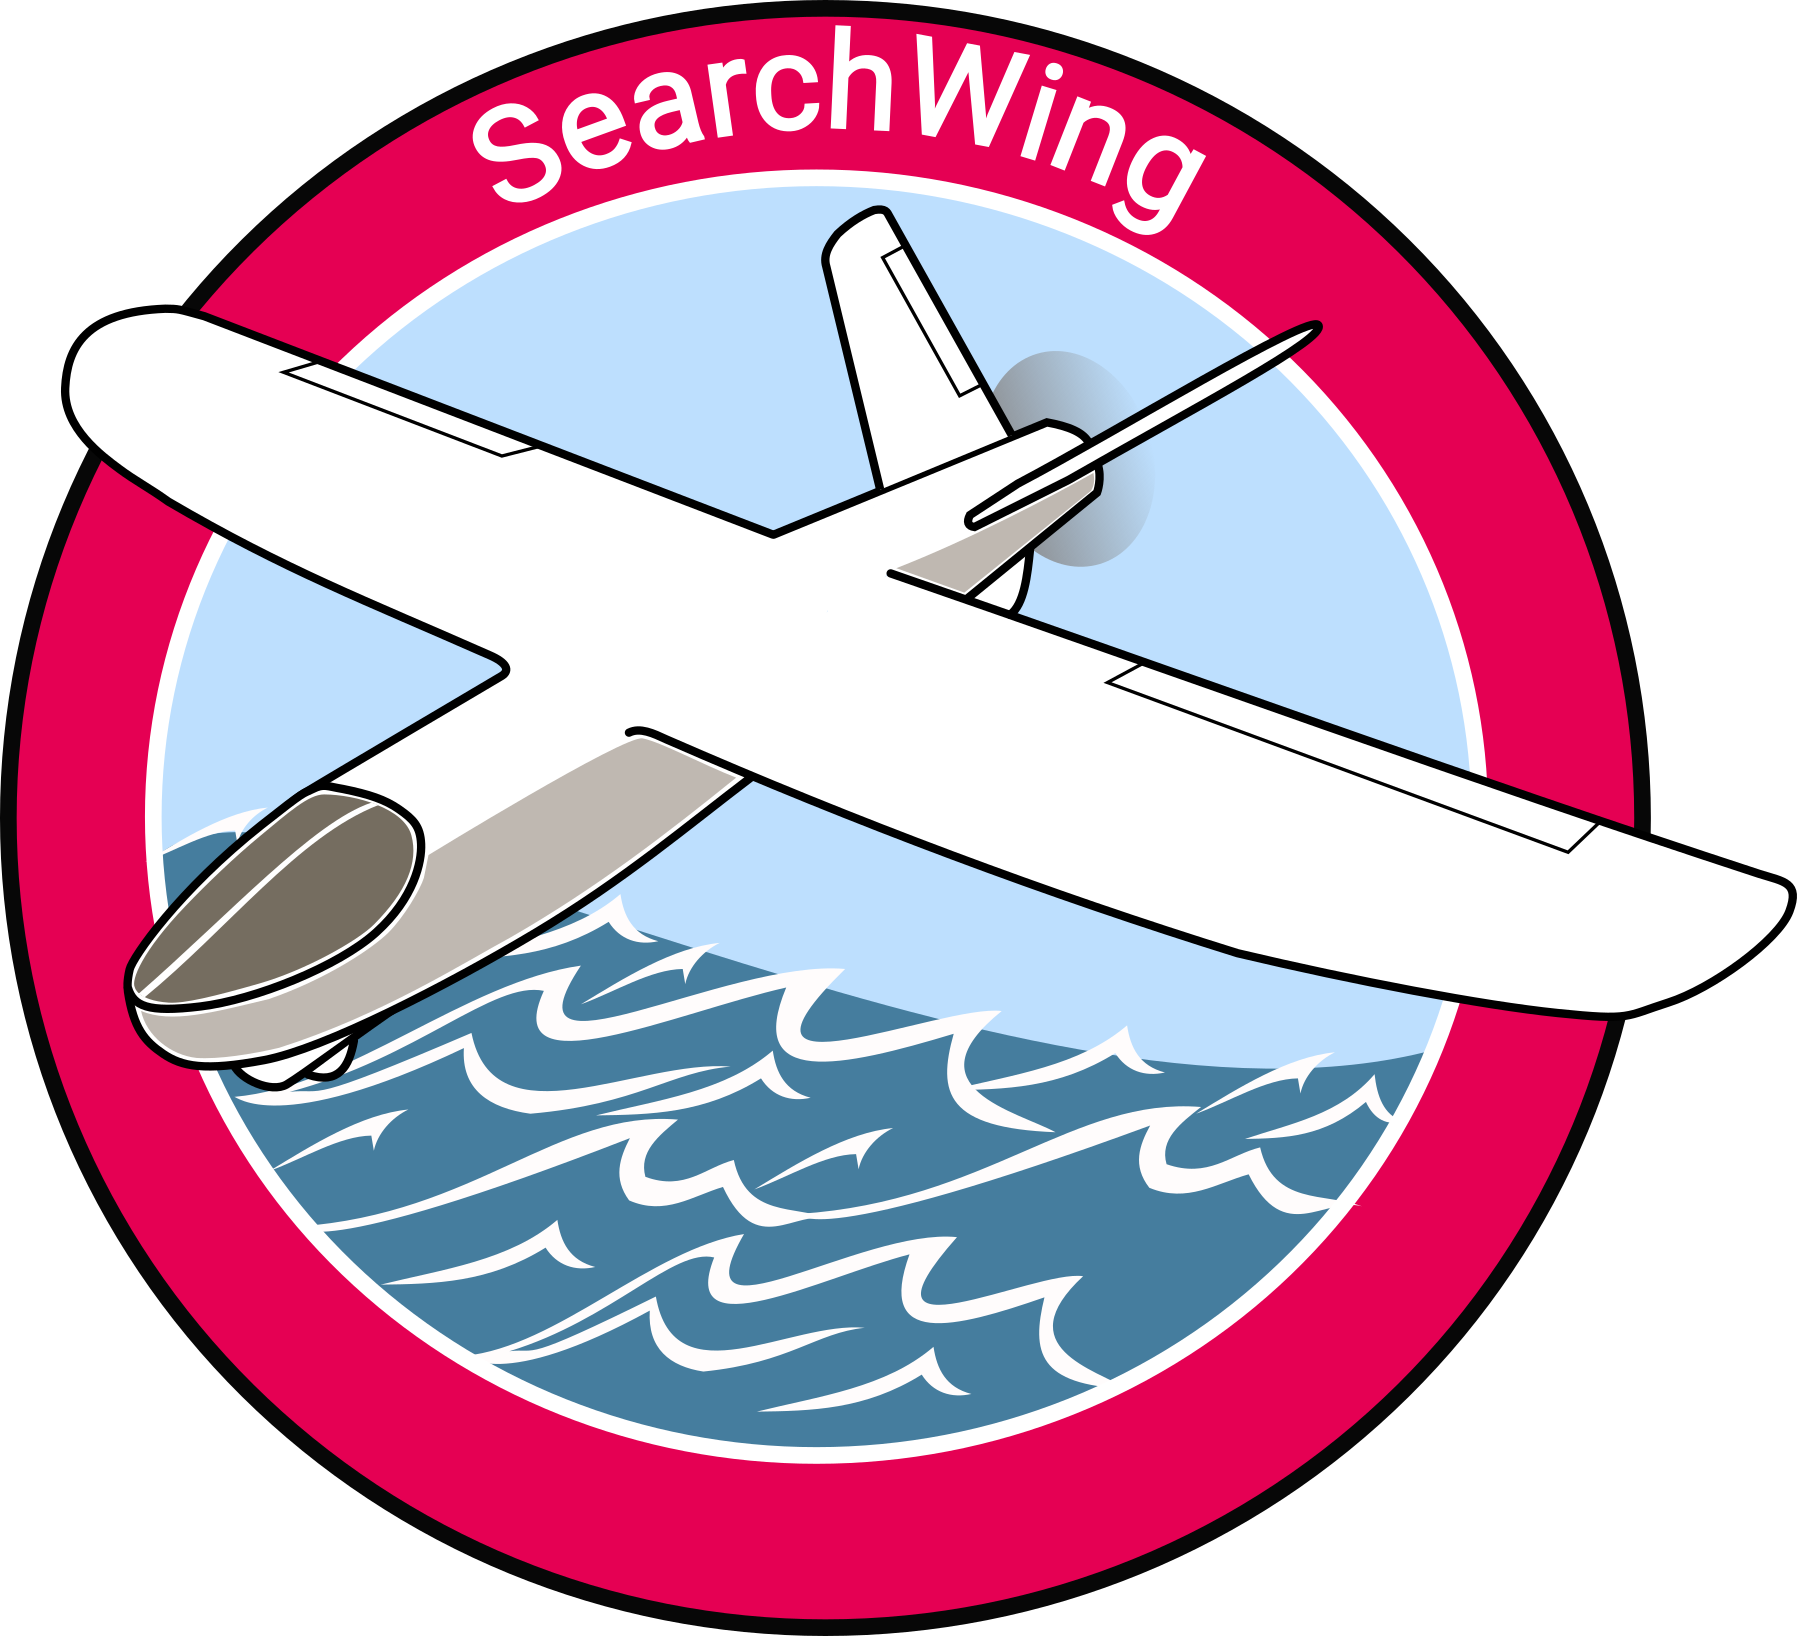 SearchWing